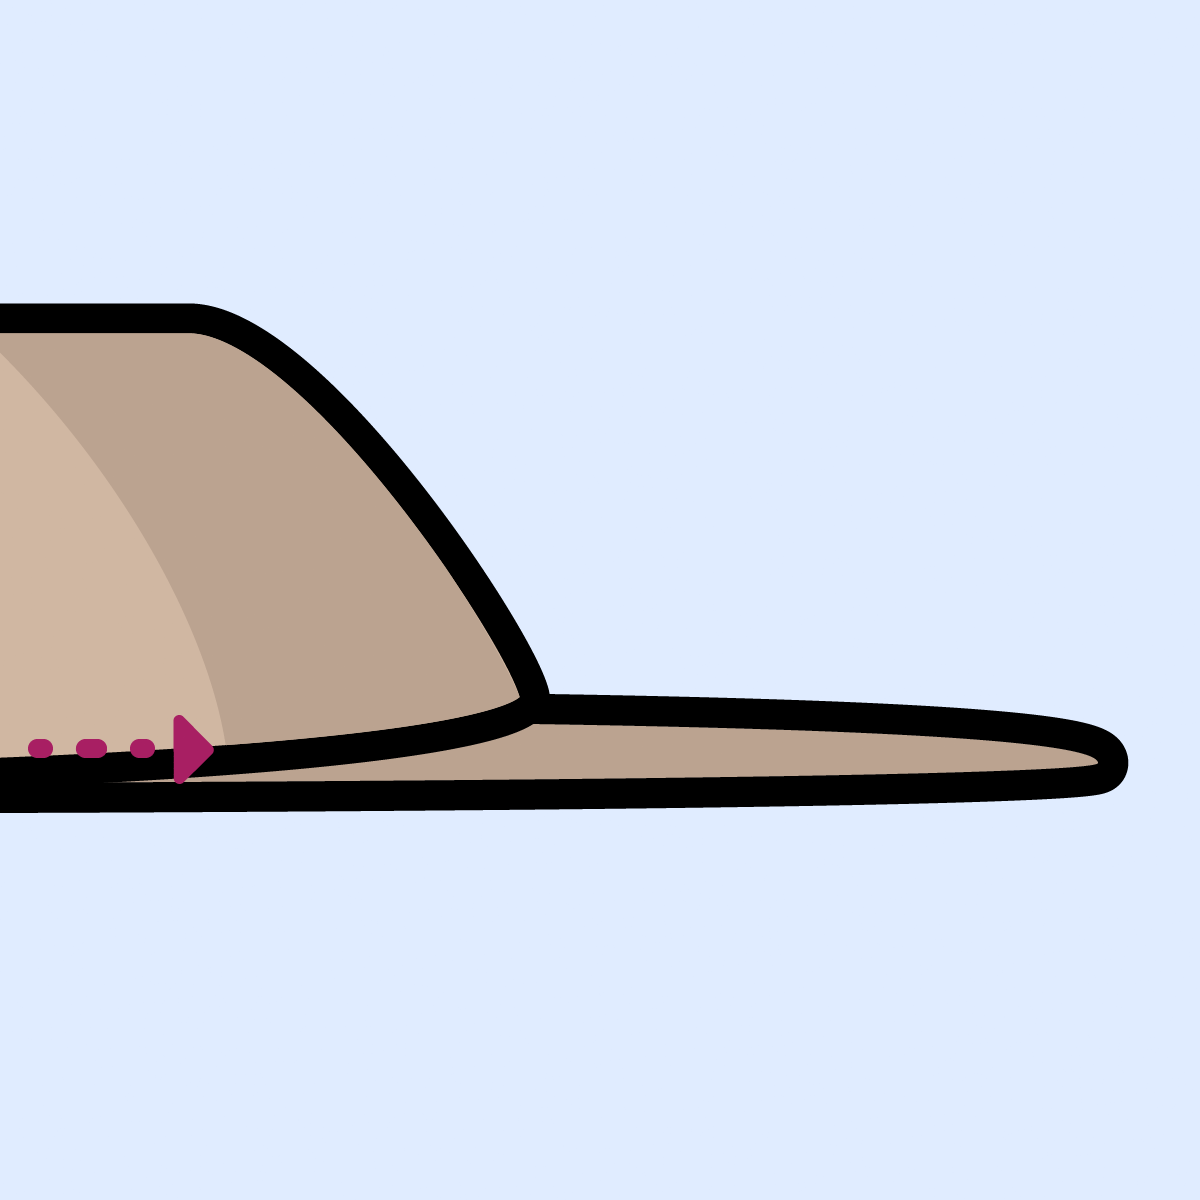 An animated GIF showing the slope of a convex skin barrier, from the base to the apex of the dome.